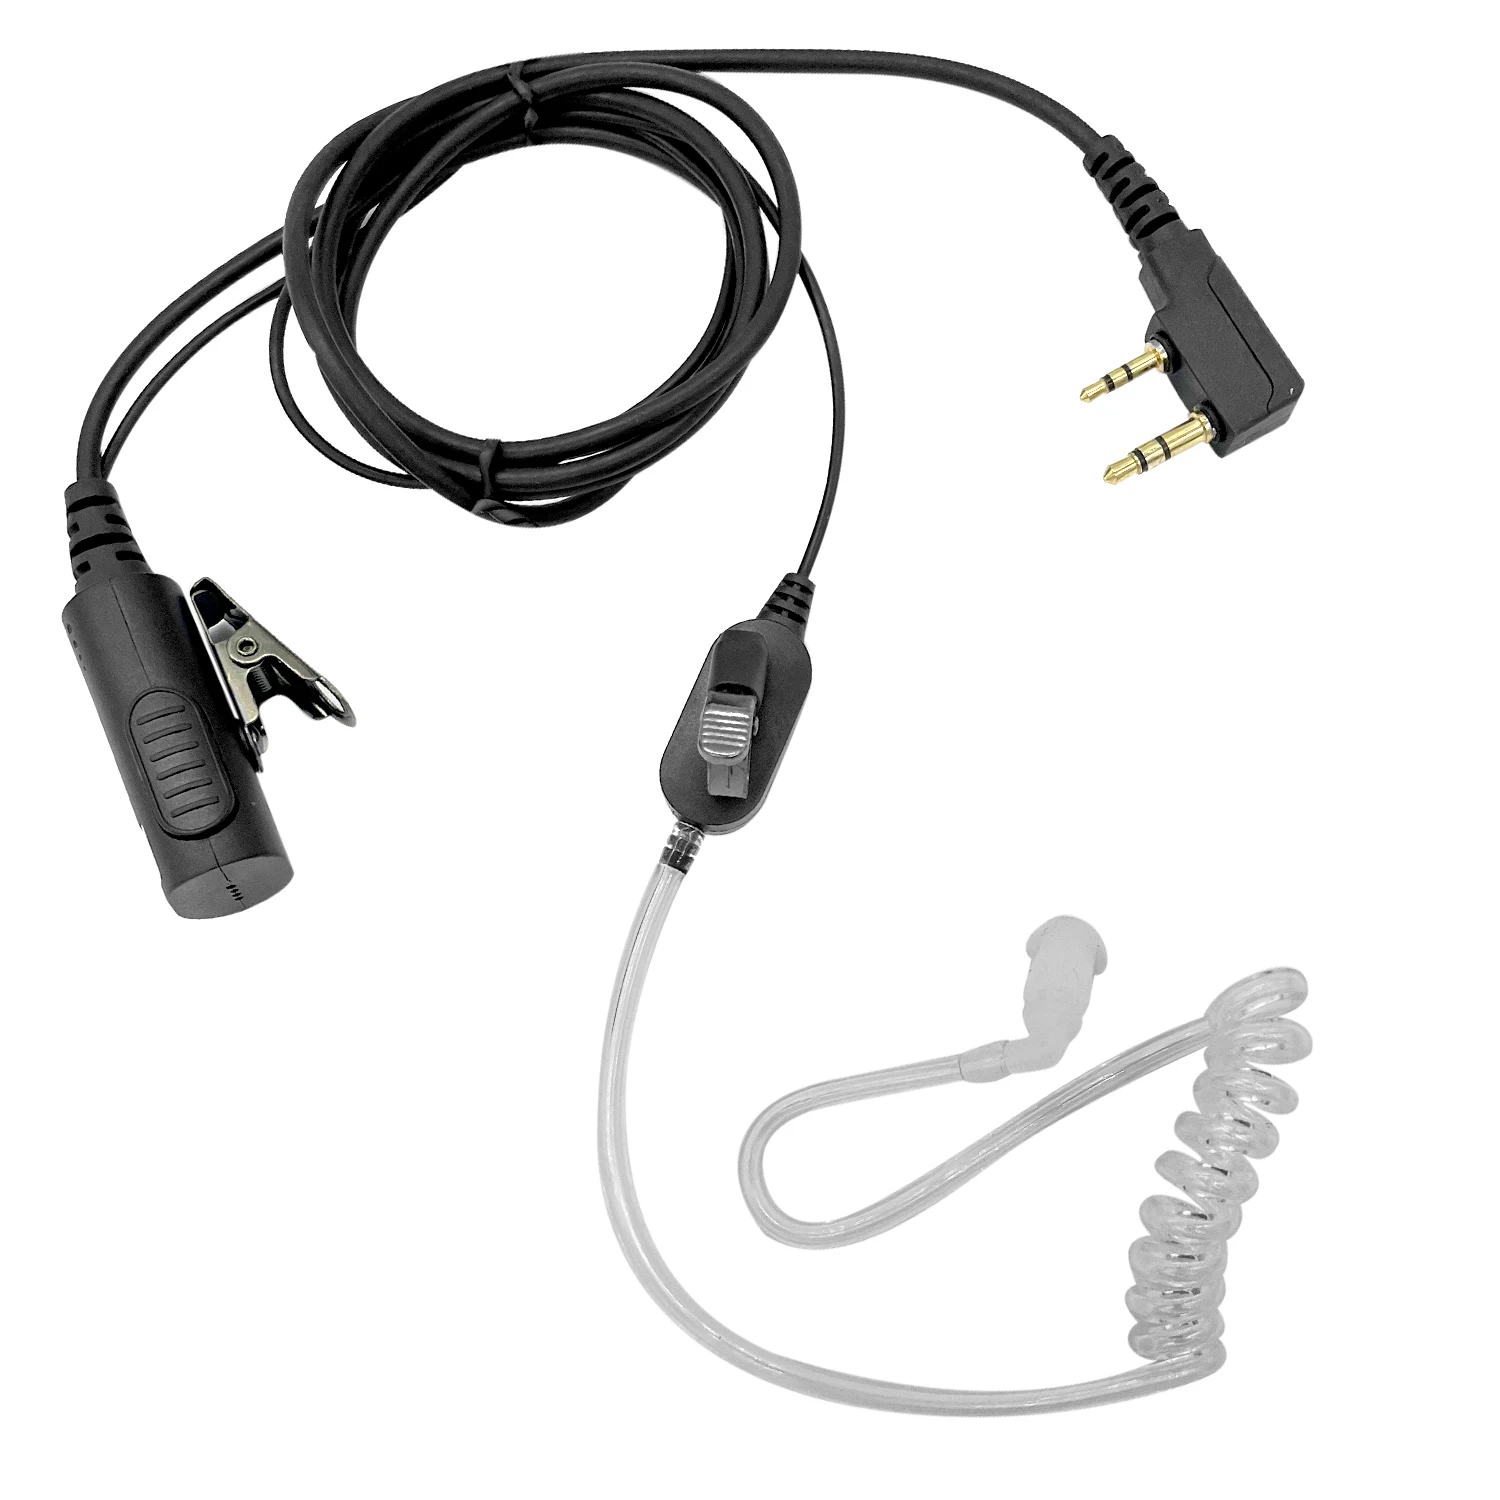 Earpiece Walkie talkie headset microphone headset Compatible with the following Models for Kenwood/Baofeng Two Way Radio